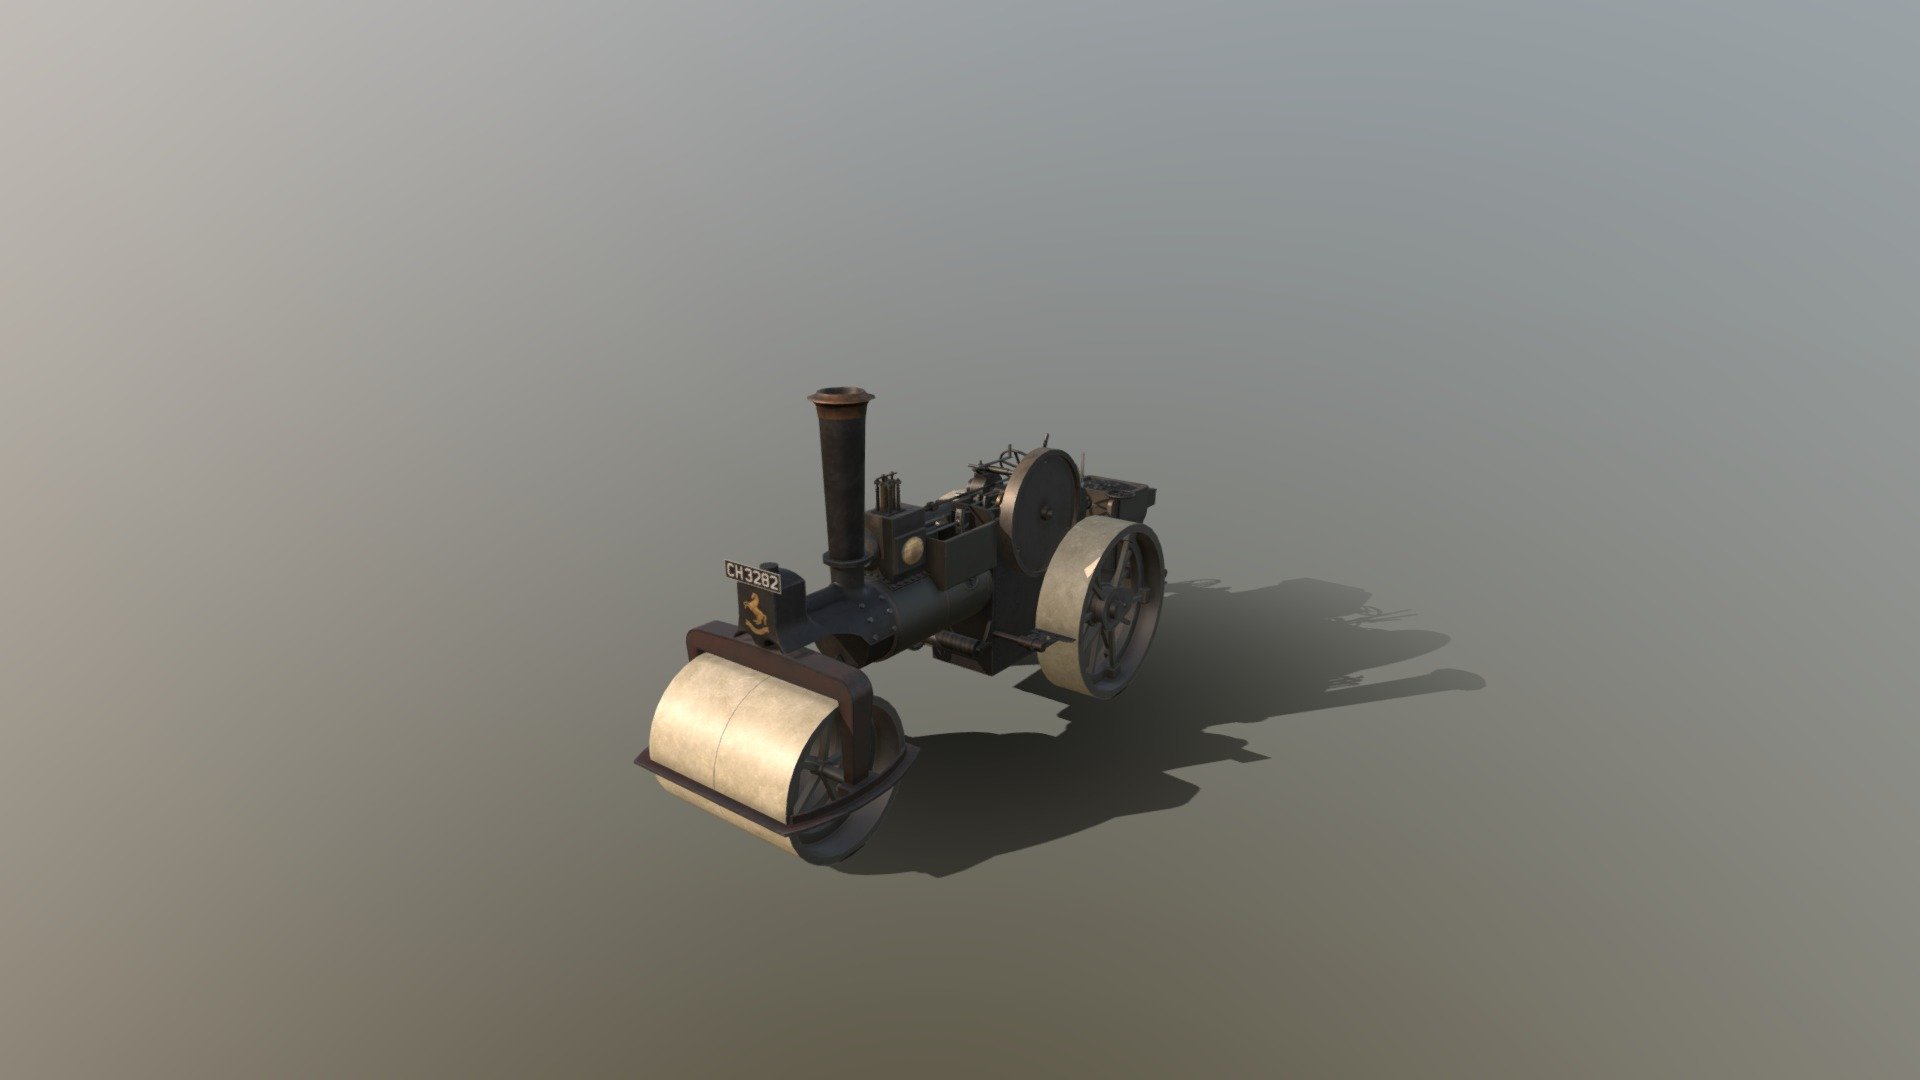 A 3D replica of Aveling &amp; Porter Type R10 No.5590 Maid Marion steam roller for Source Filmmaker and Garry's Mod.

Download links for this model:

SFM - https://steamcommunity.com/sharedfiles/filedetails/?id=2861069140

GMod - https://steamcommunity.com/sharedfiles/filedetails/?id=2861077073 - The Steamroller (The Titfield Thunderbolt) - 3D model by YanPictures (@jlee21) 3d model